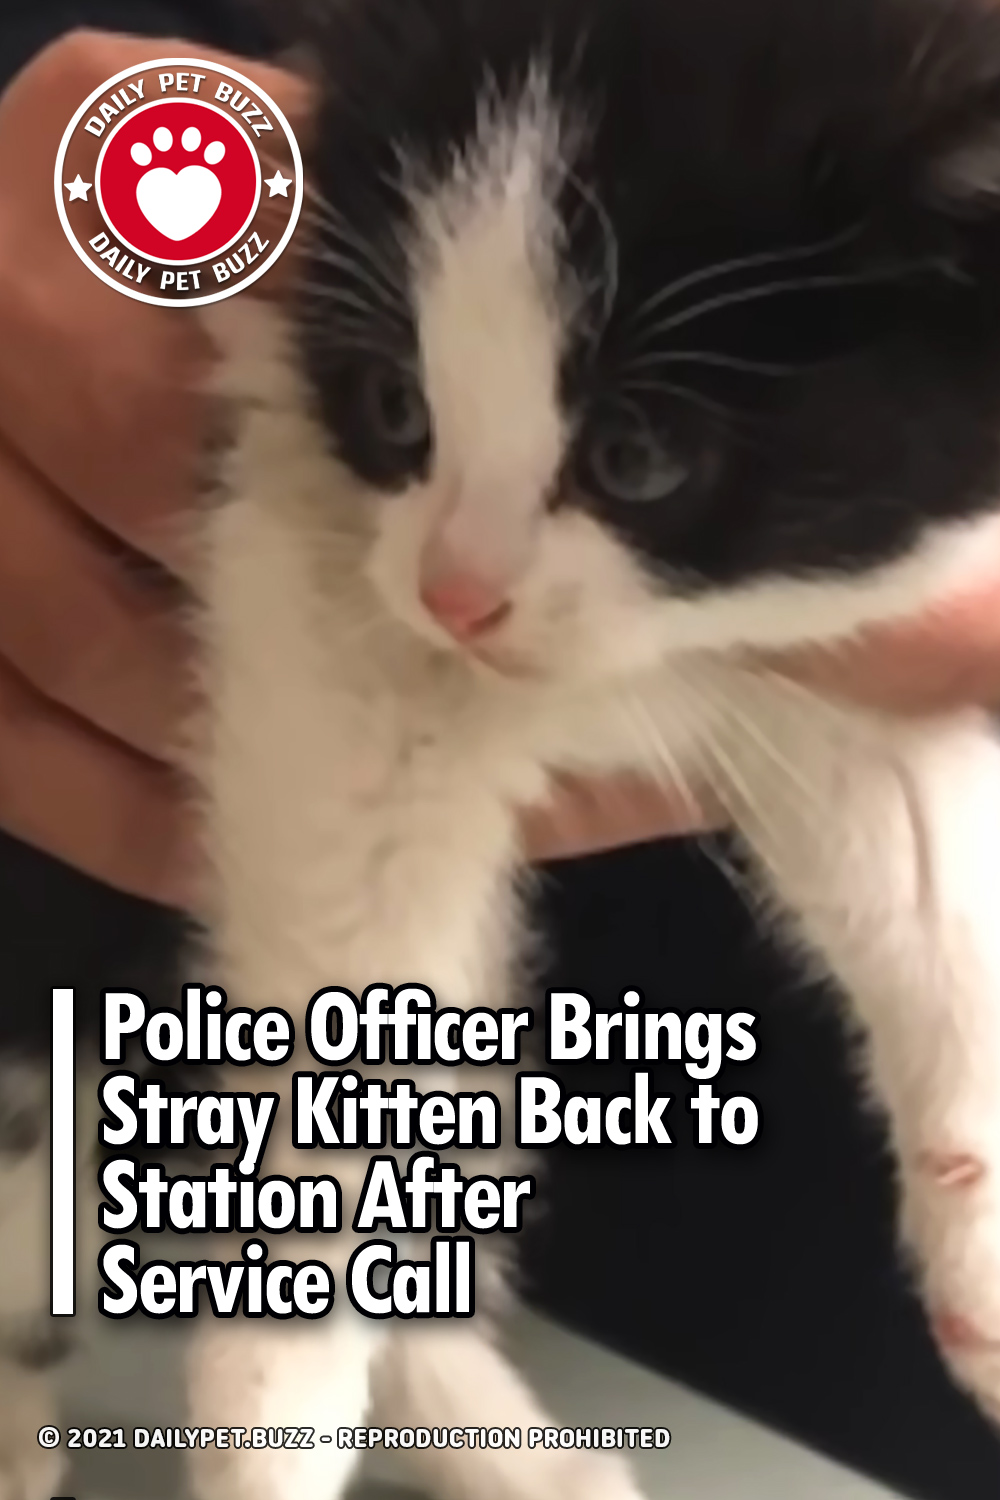 Police Officer Brings Stray Kitten Back to Station After Service Call